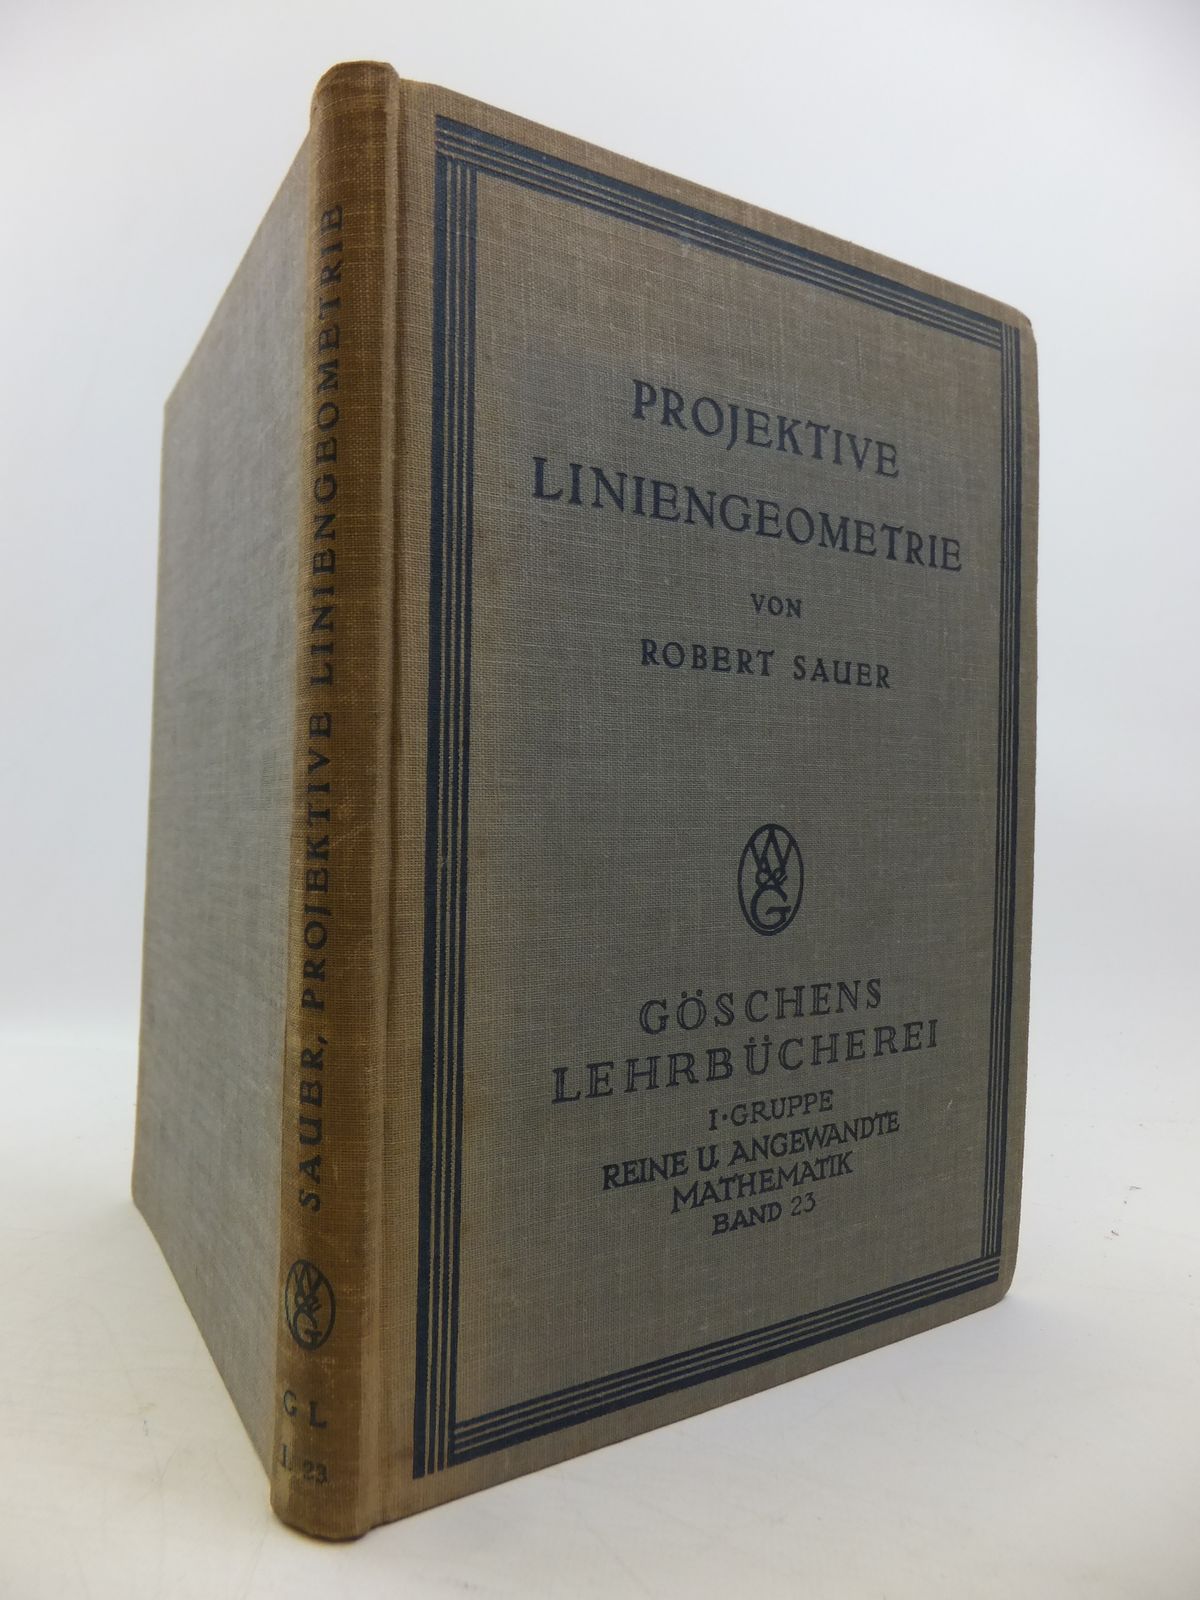 Photo of PROJEKTIVE LINIENGEOMETRIE written by Sauer, Robert published by Walter De Gruyter (STOCK CODE: 1811410)  for sale by Stella & Rose's Books